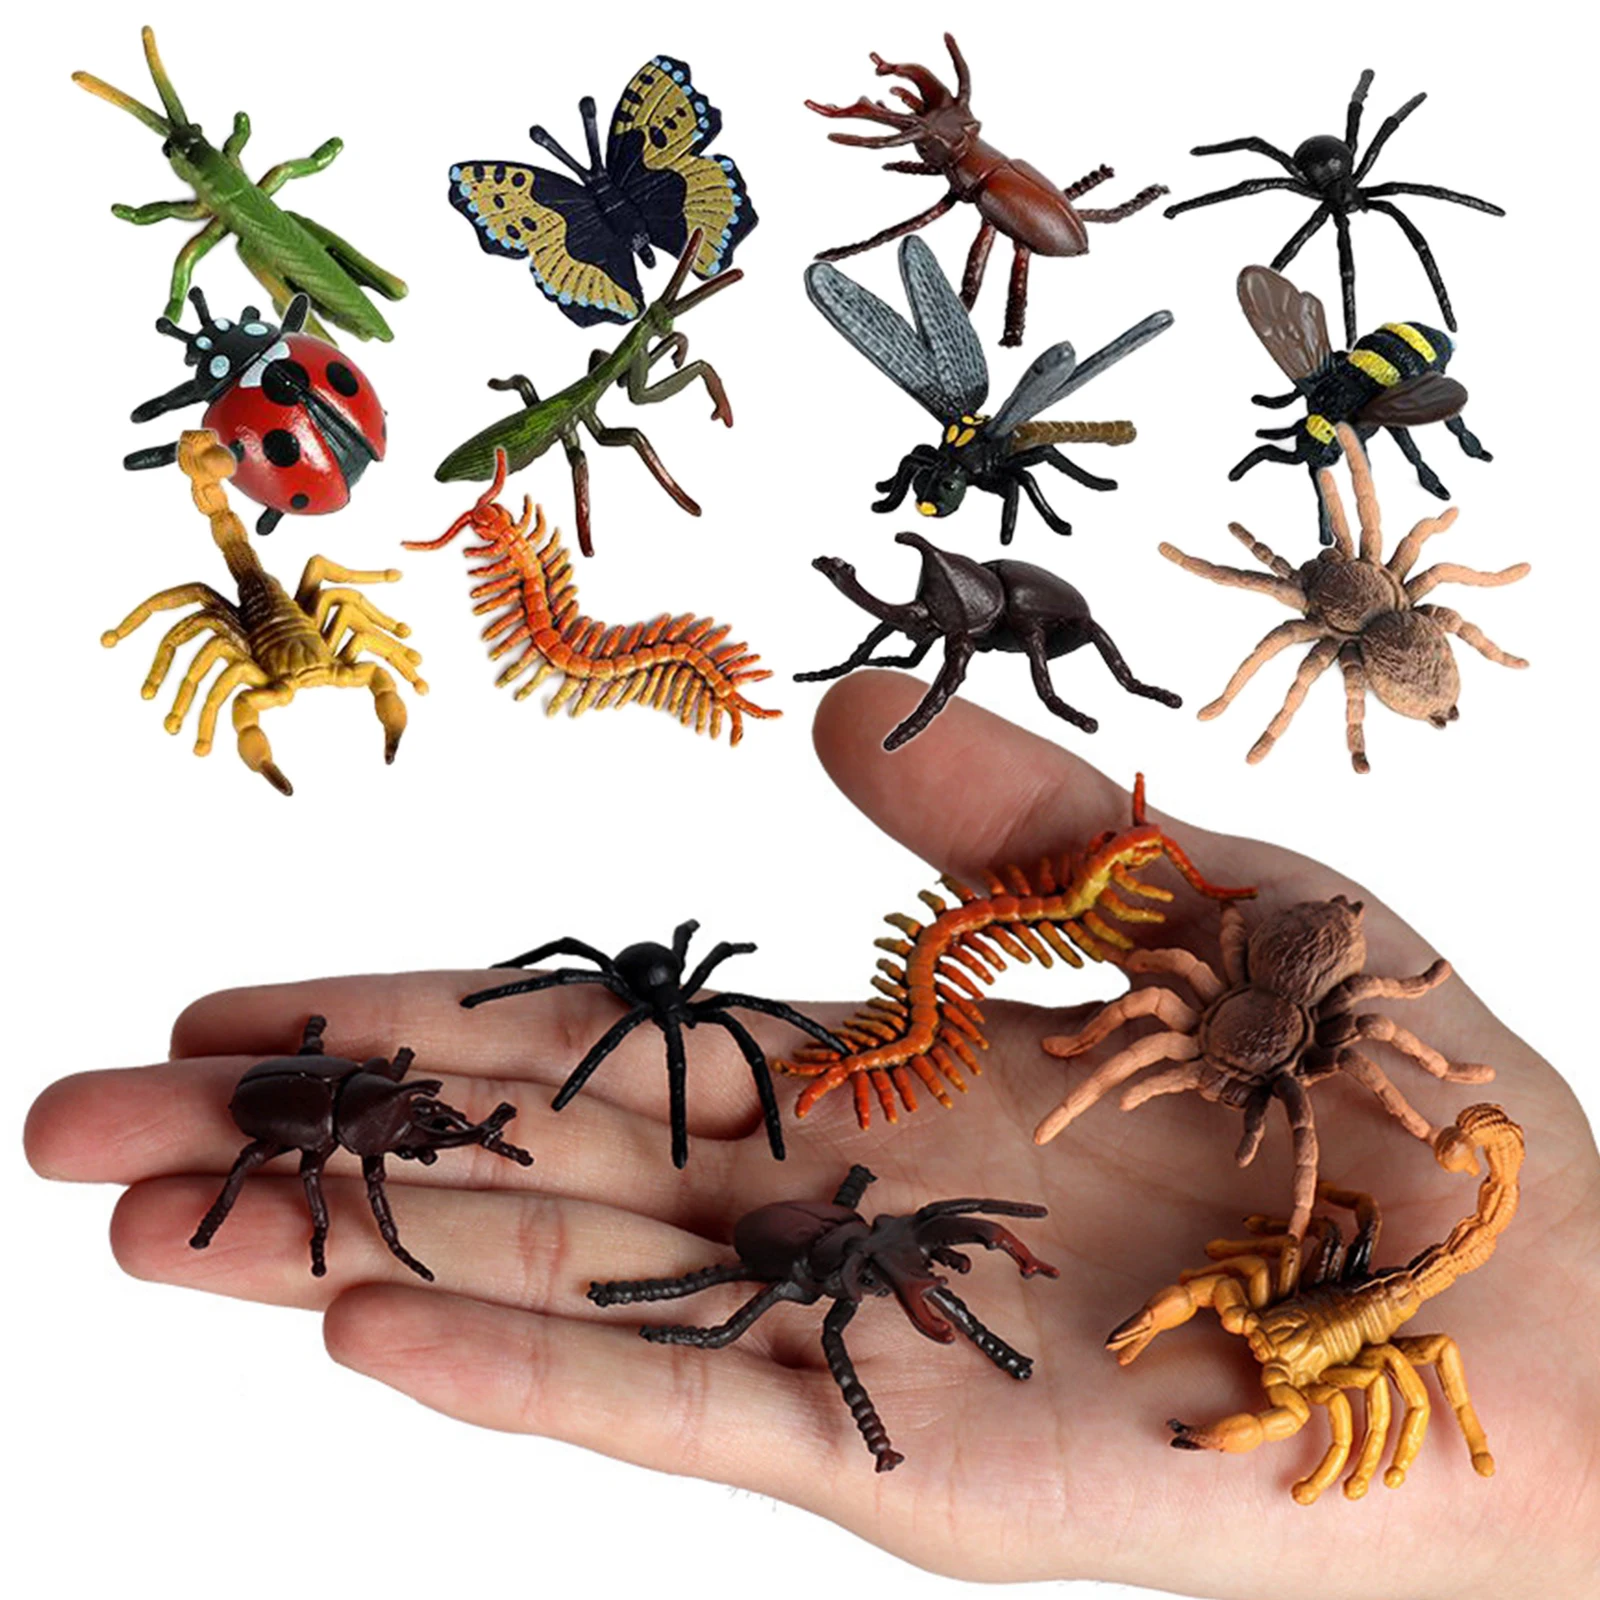 Mini Insects Locust Wild Animal Bug Figurines Insects Toy Play Kids Party 